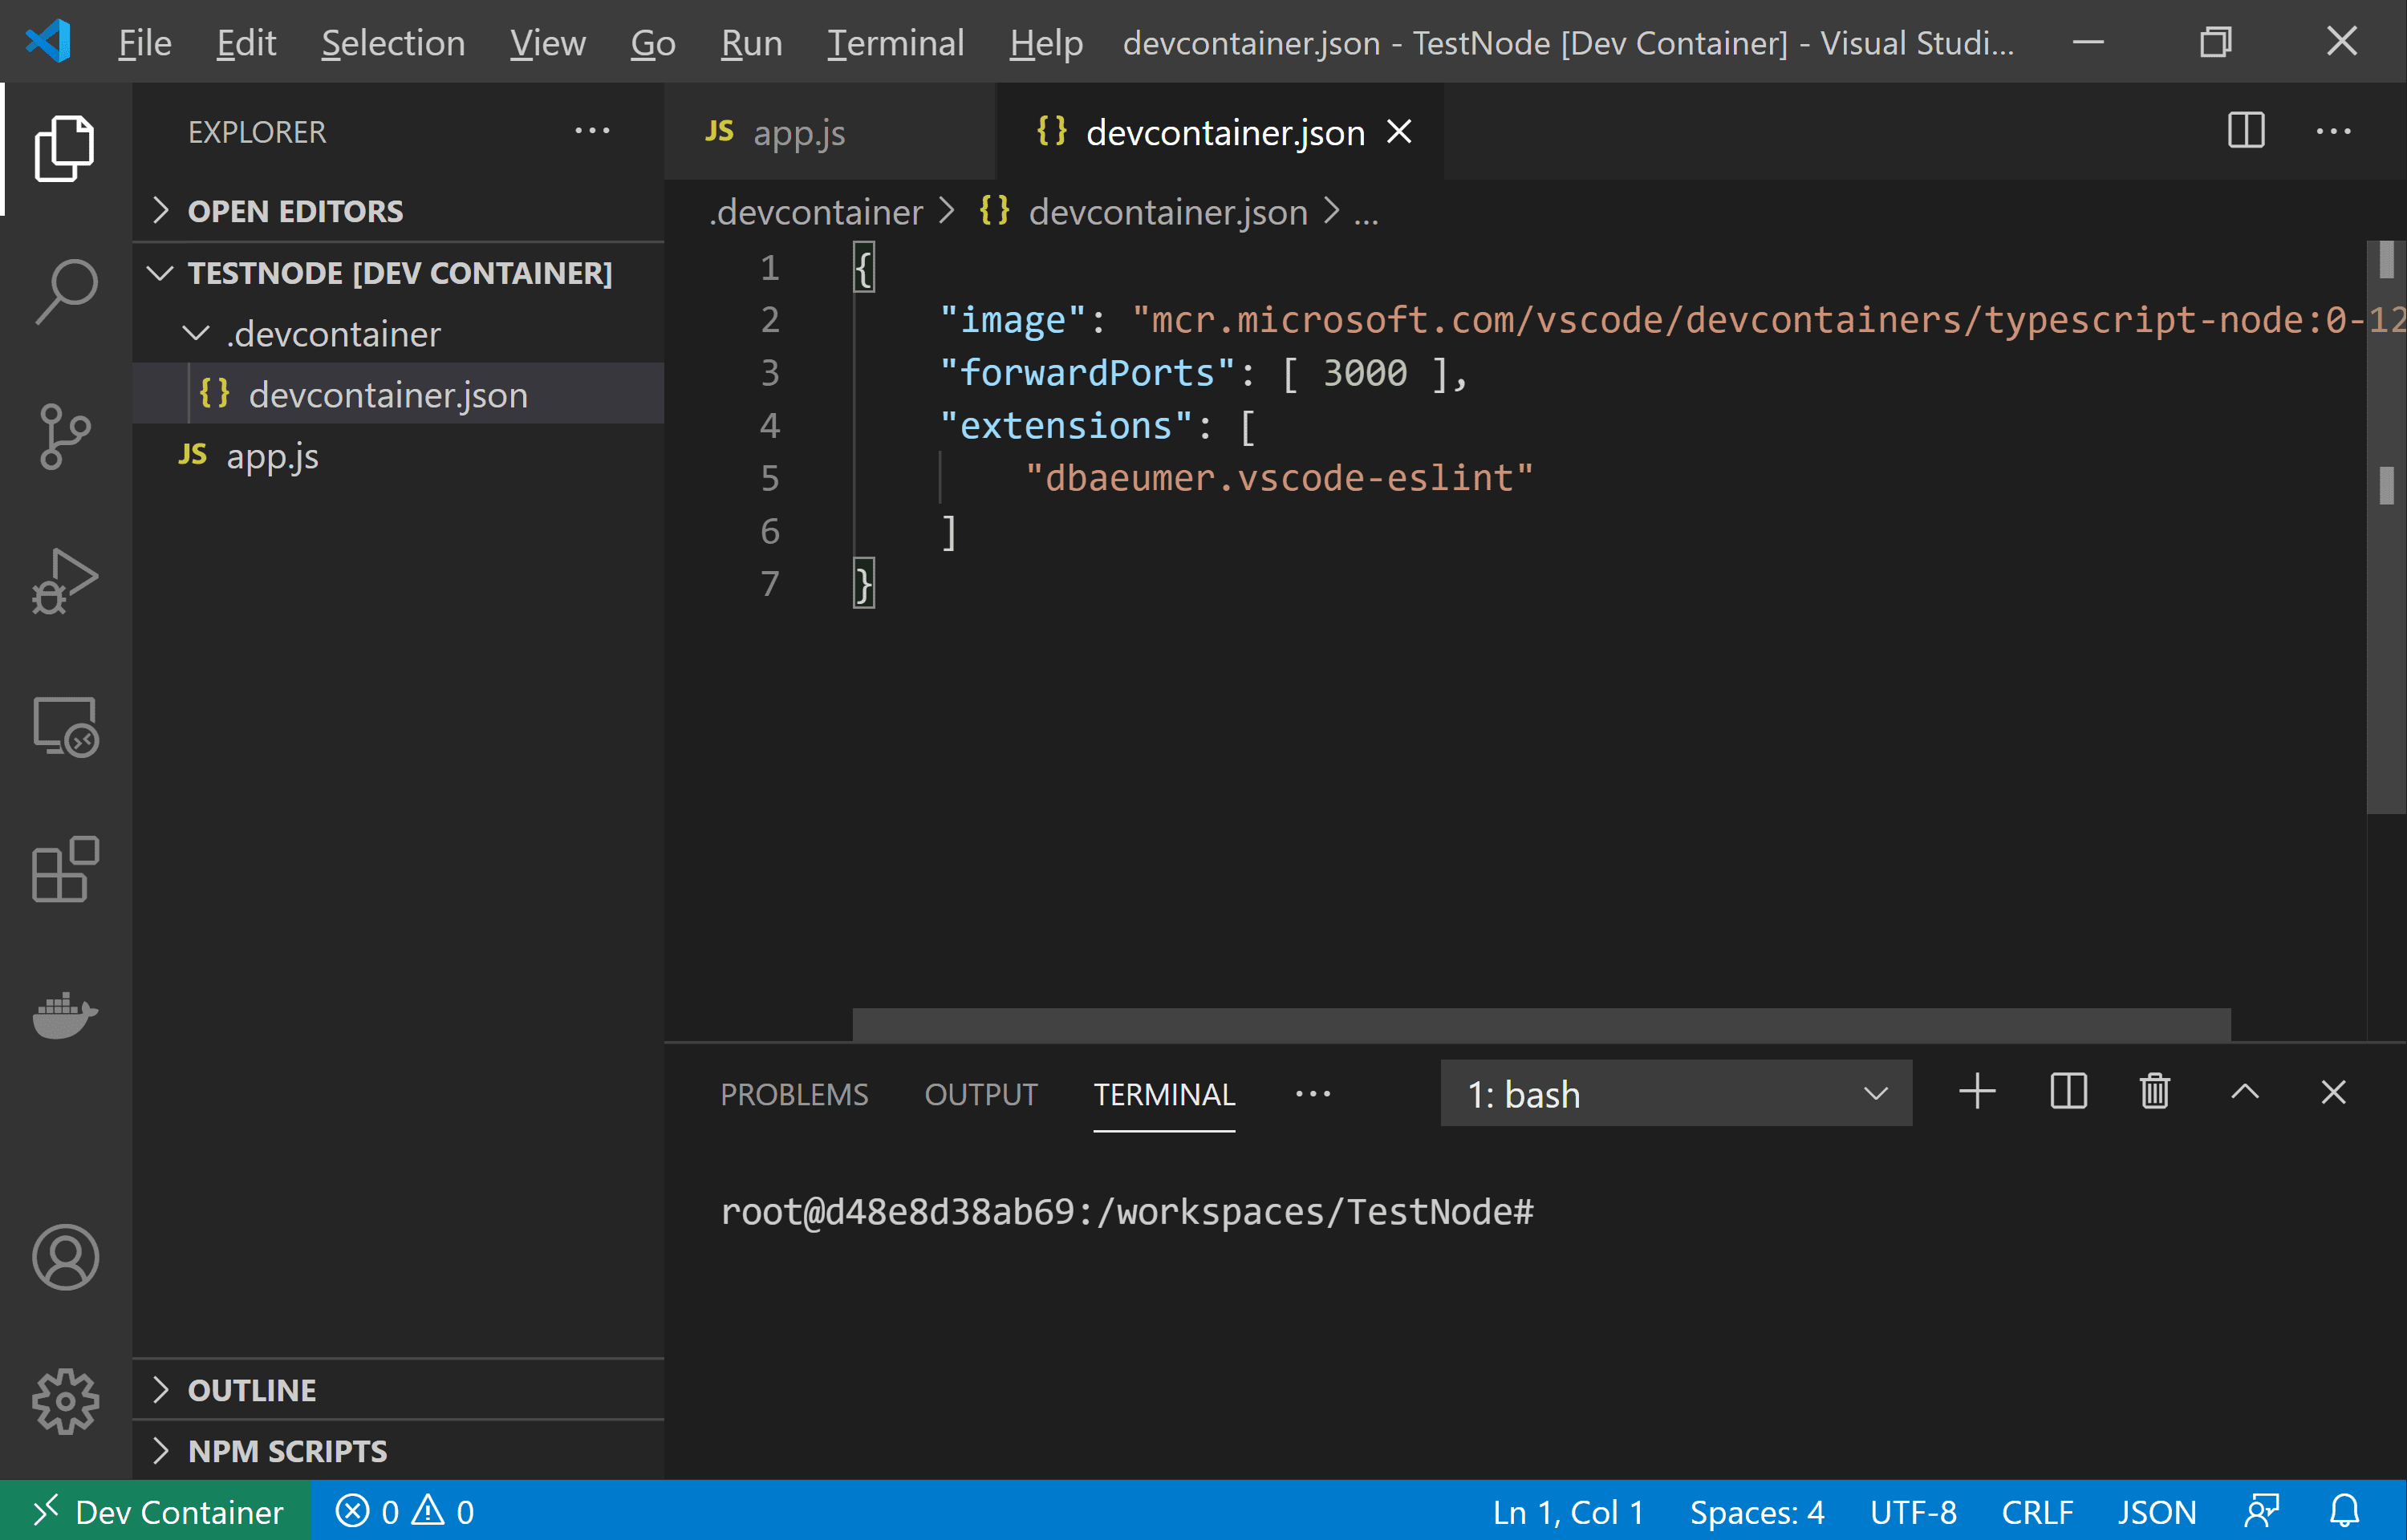 VS Code instance connected to dev container